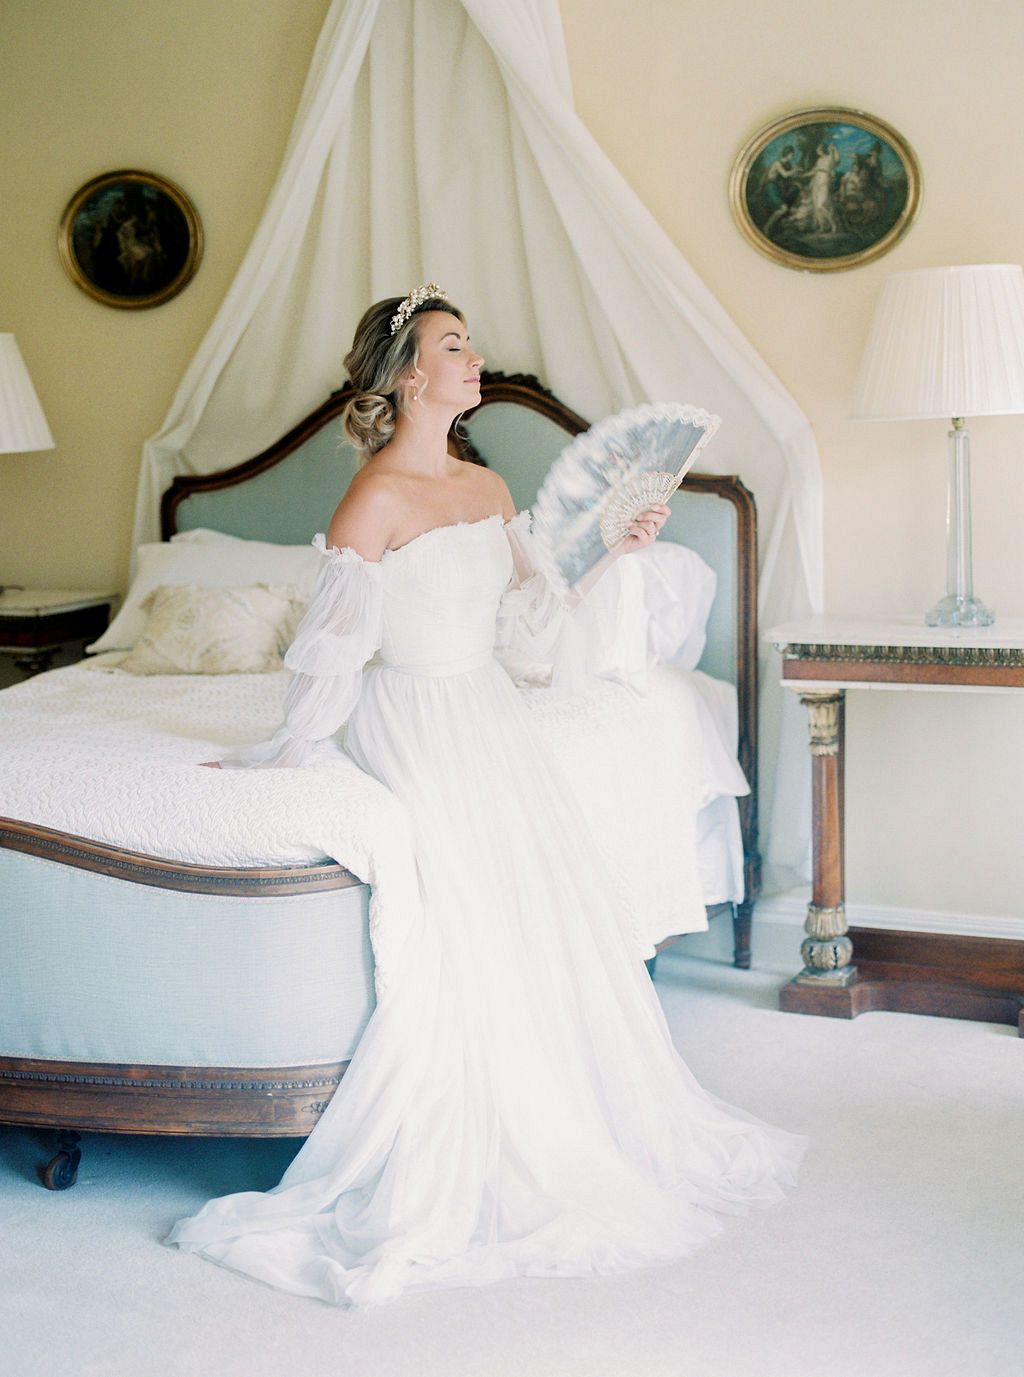 The Top 15 Elopement and Micro Wedding Trends for 2022